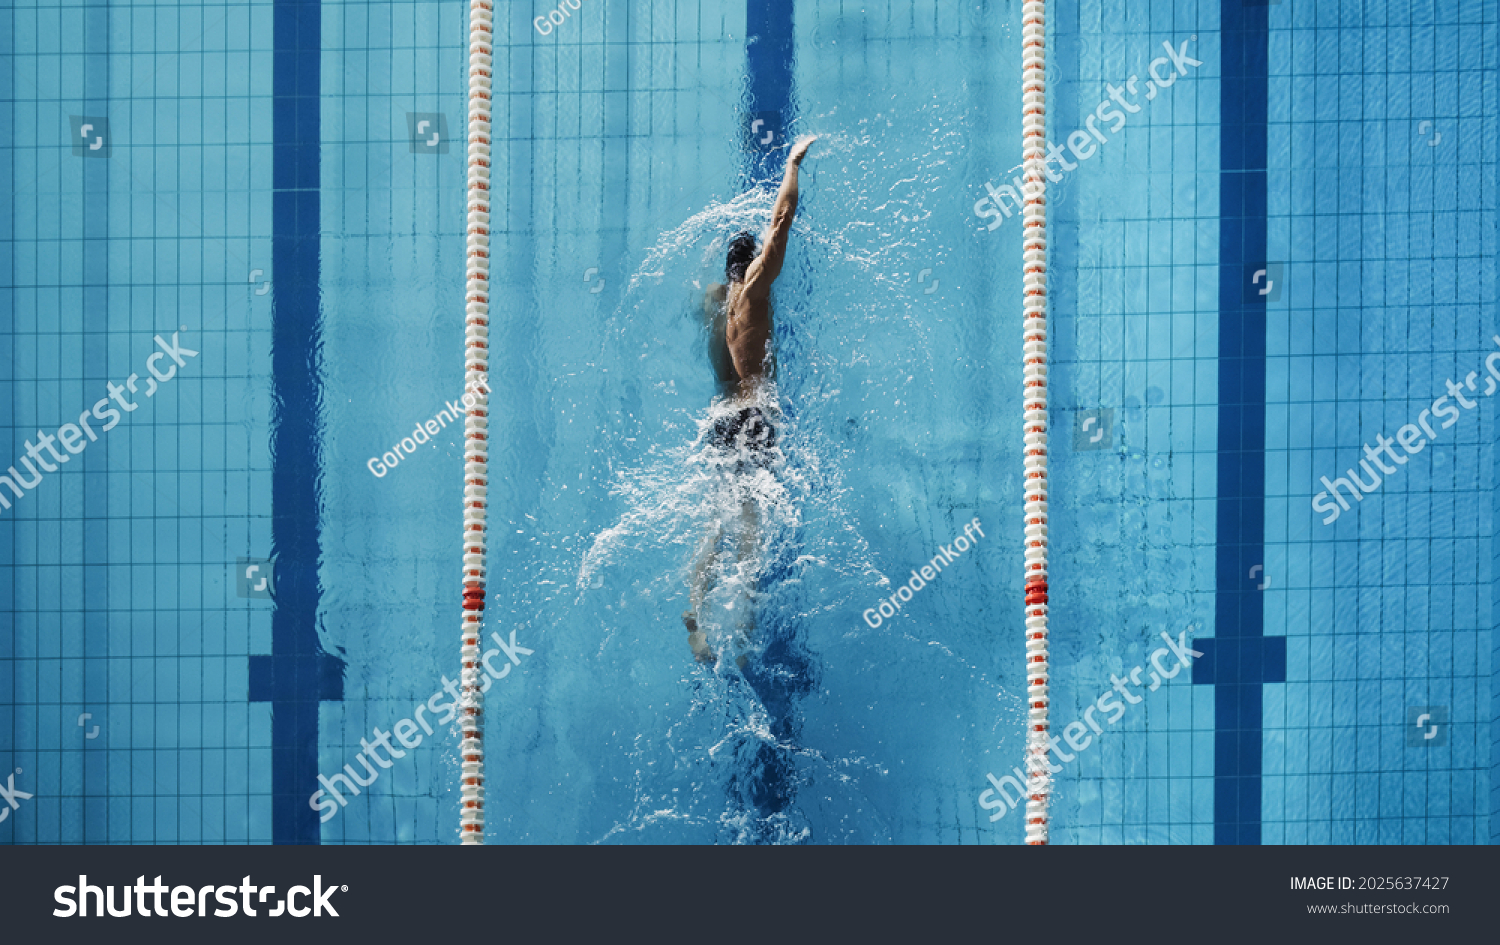 Aerial Top View Male Swimmer Swimming in Swimming Pool. Professional Athlete Training for the Championship, using Front Crawl, Freestyle Technique. Top View Shot #2025637427